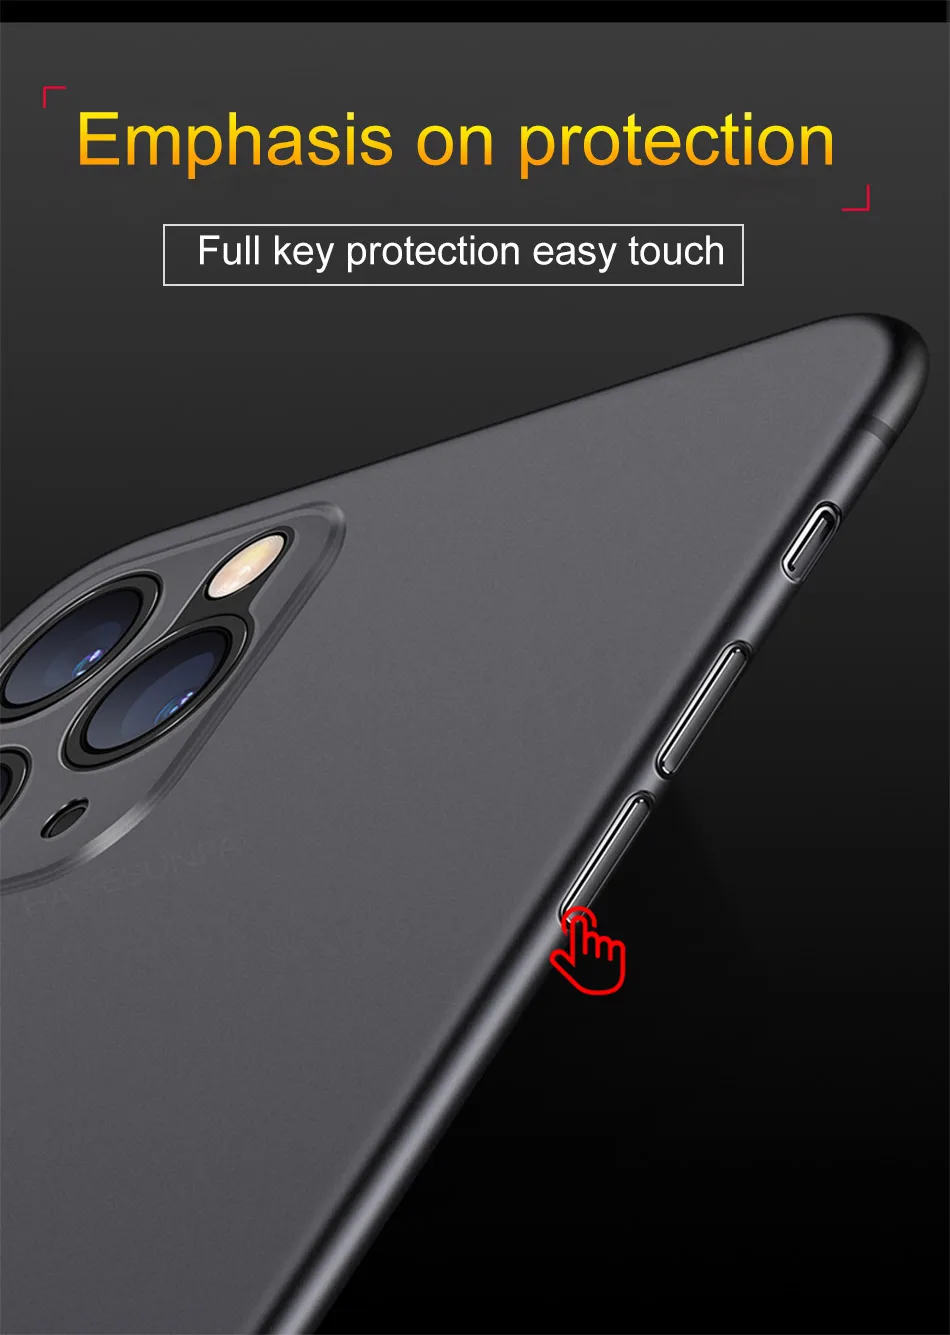 Ultra Thin 0.2mm Matte Case For IPhone 13 12 Mini X XR XS 11 Pro Max Full Cover For IPhone 7 6 6s 8 Plus Hard PC Shockproof Case iphone 12 pro max wallet case